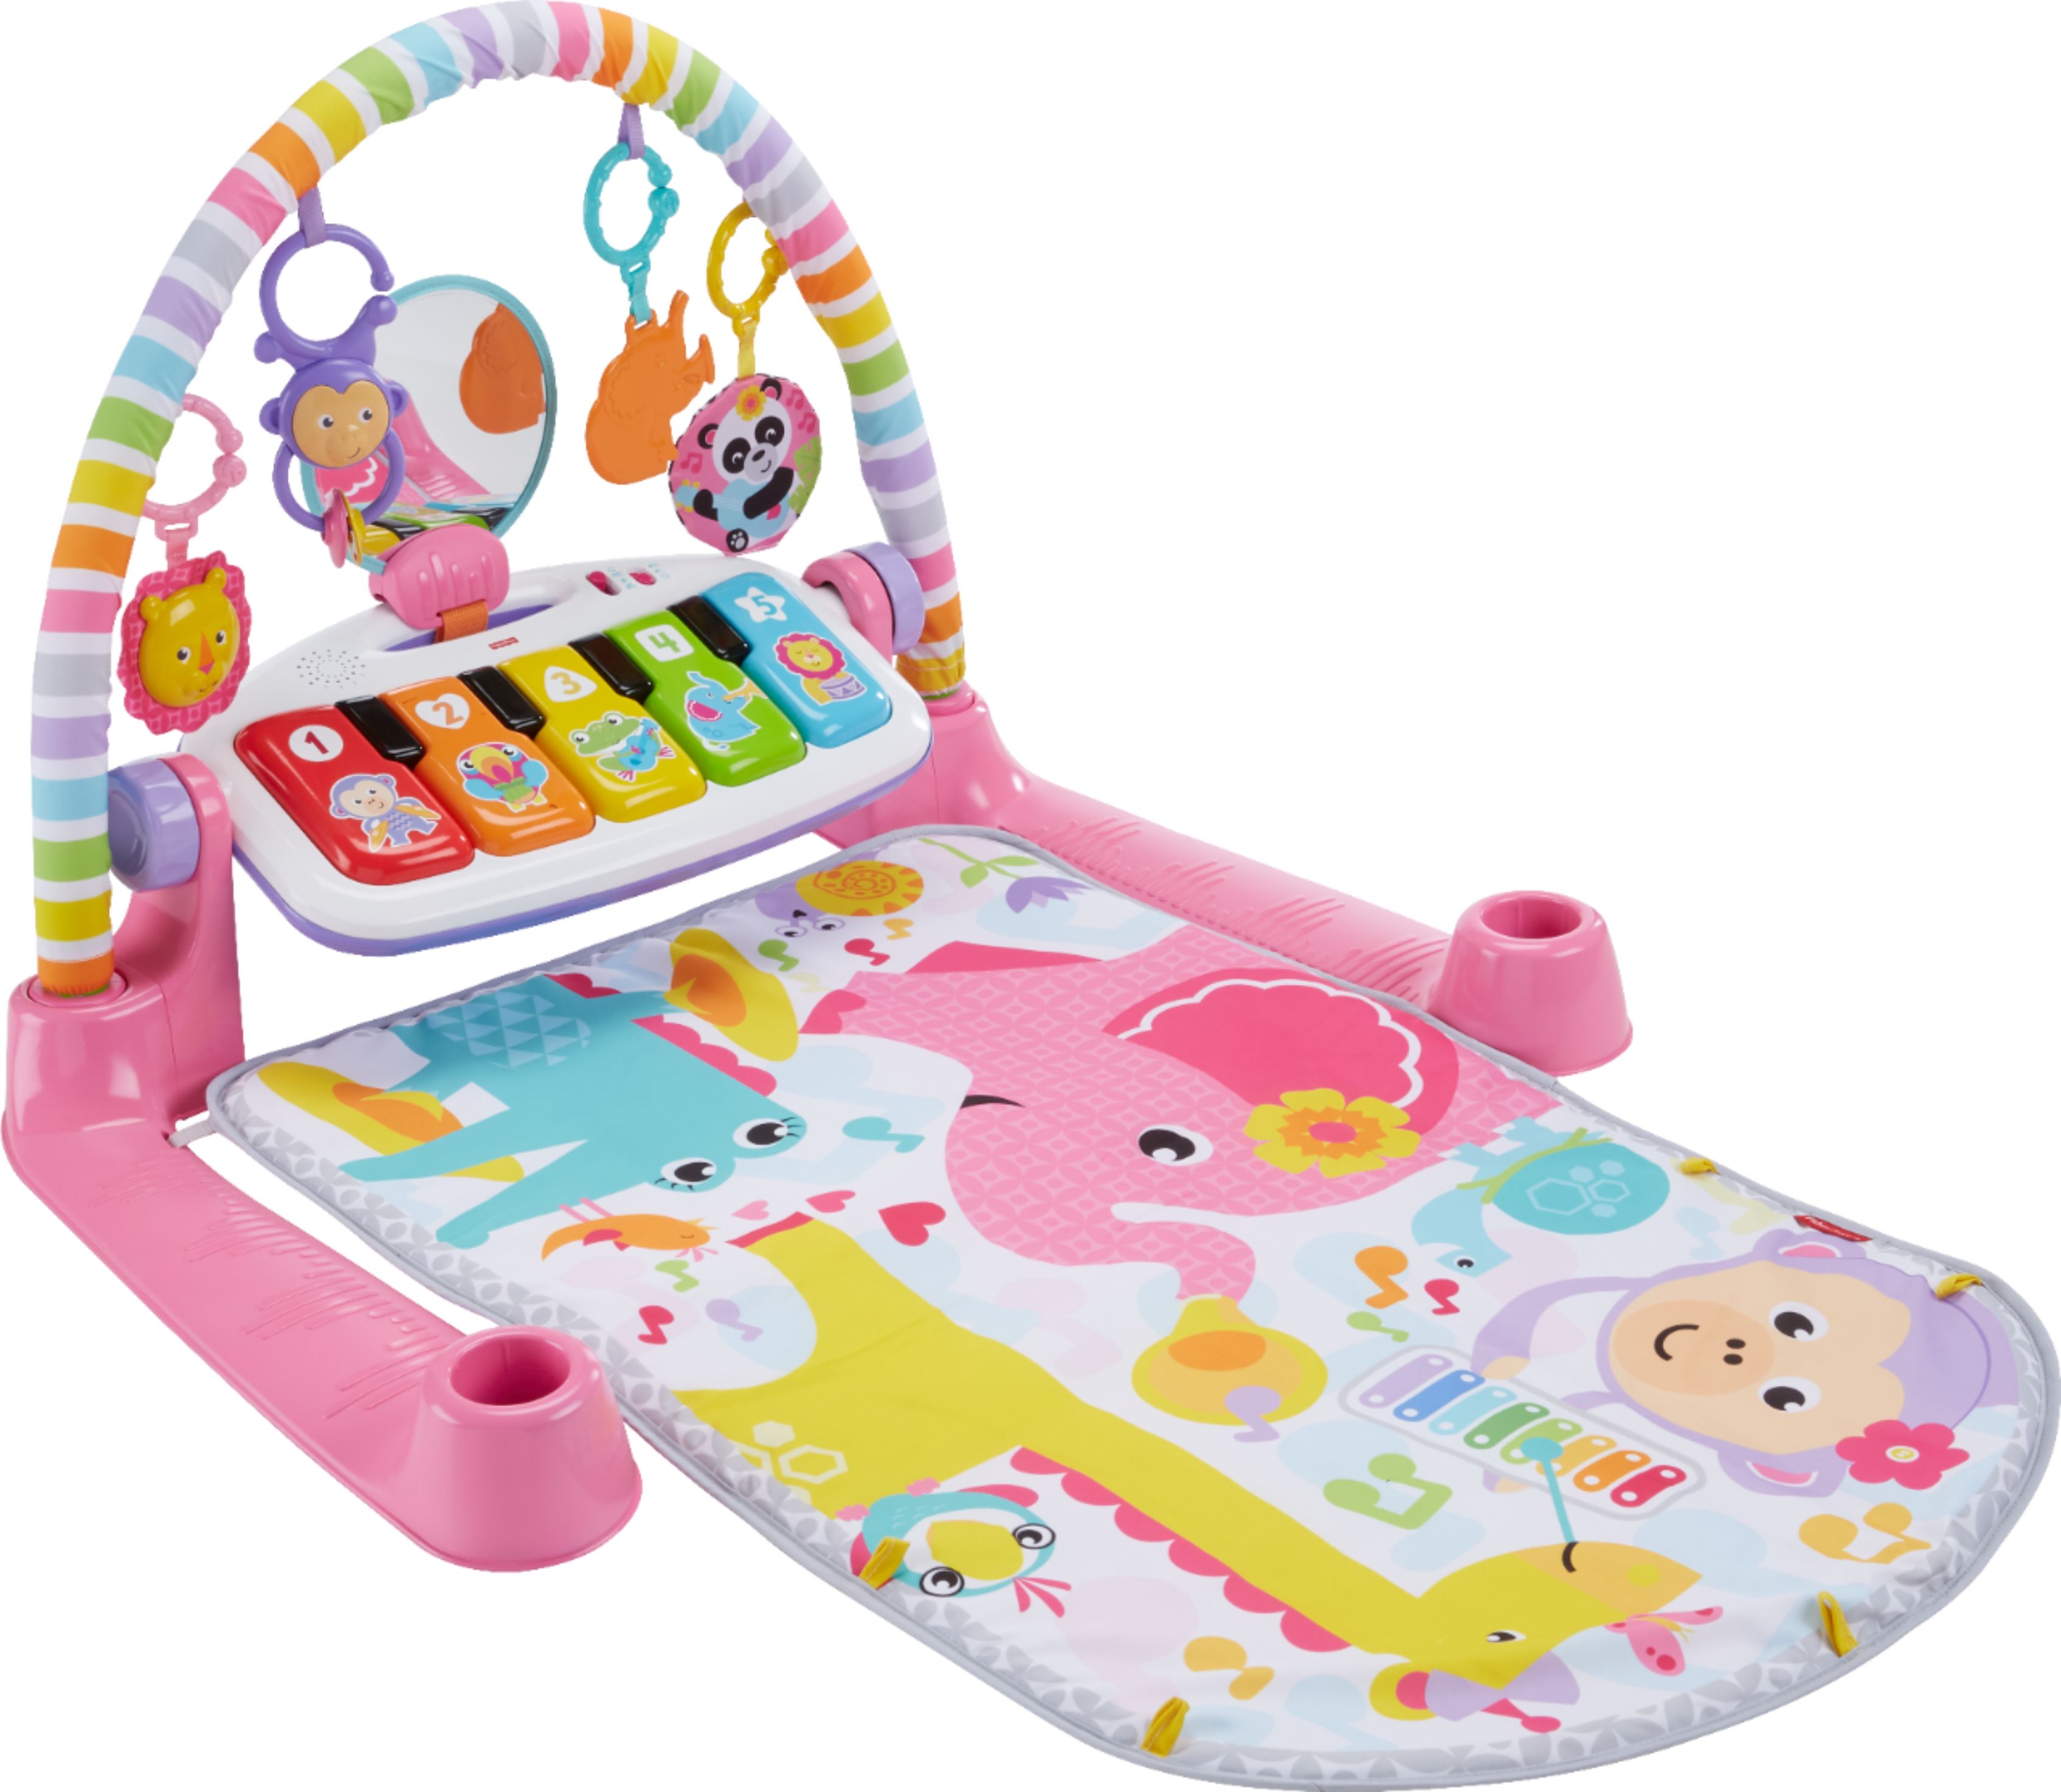 Angle View: Fisher-Price - Deluxe Kick & Play Piano Gym - Pink/Yellow/White